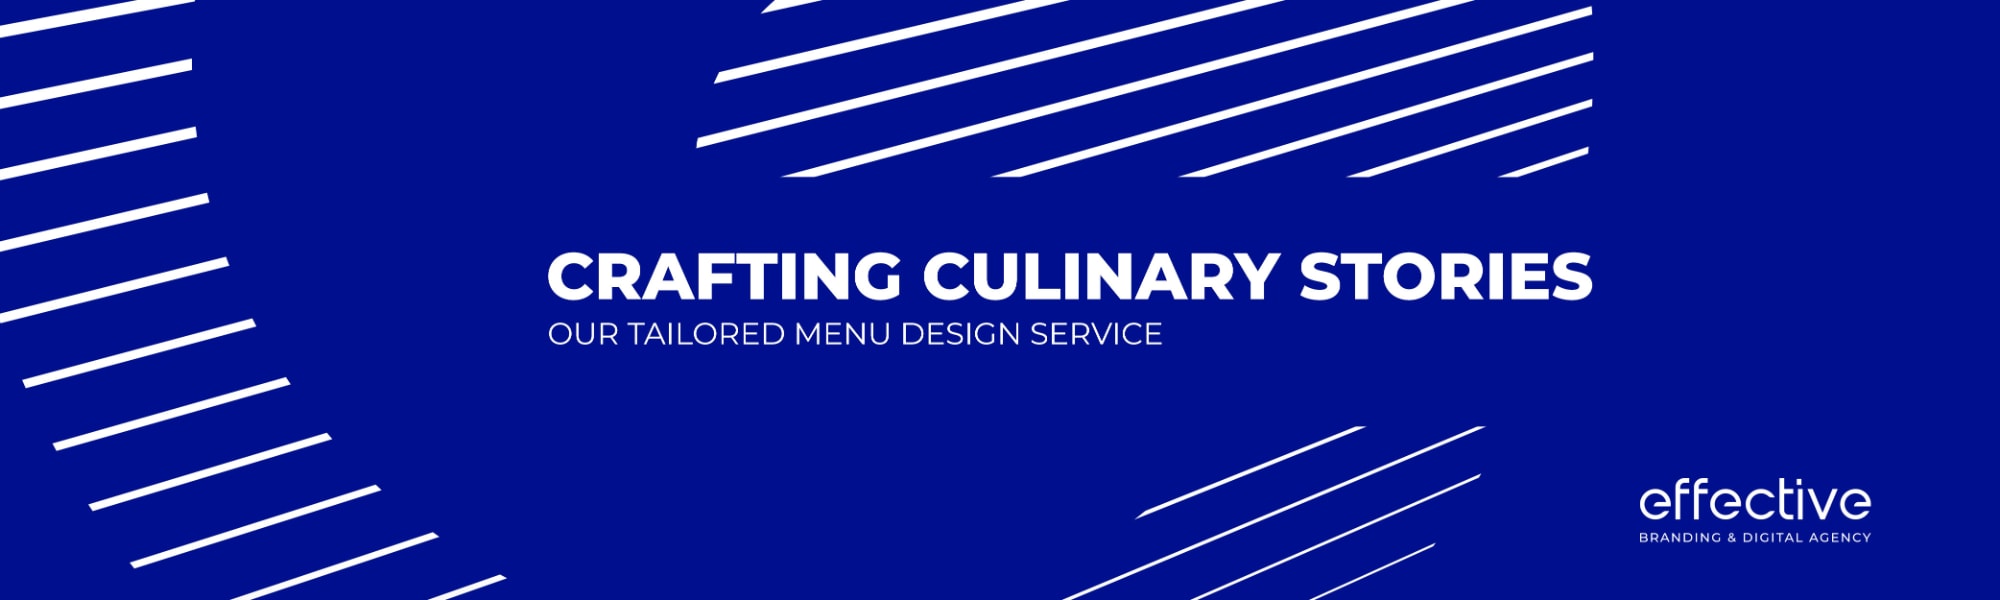 Crafting Culinary Stories Our Tailored Menu Design Service